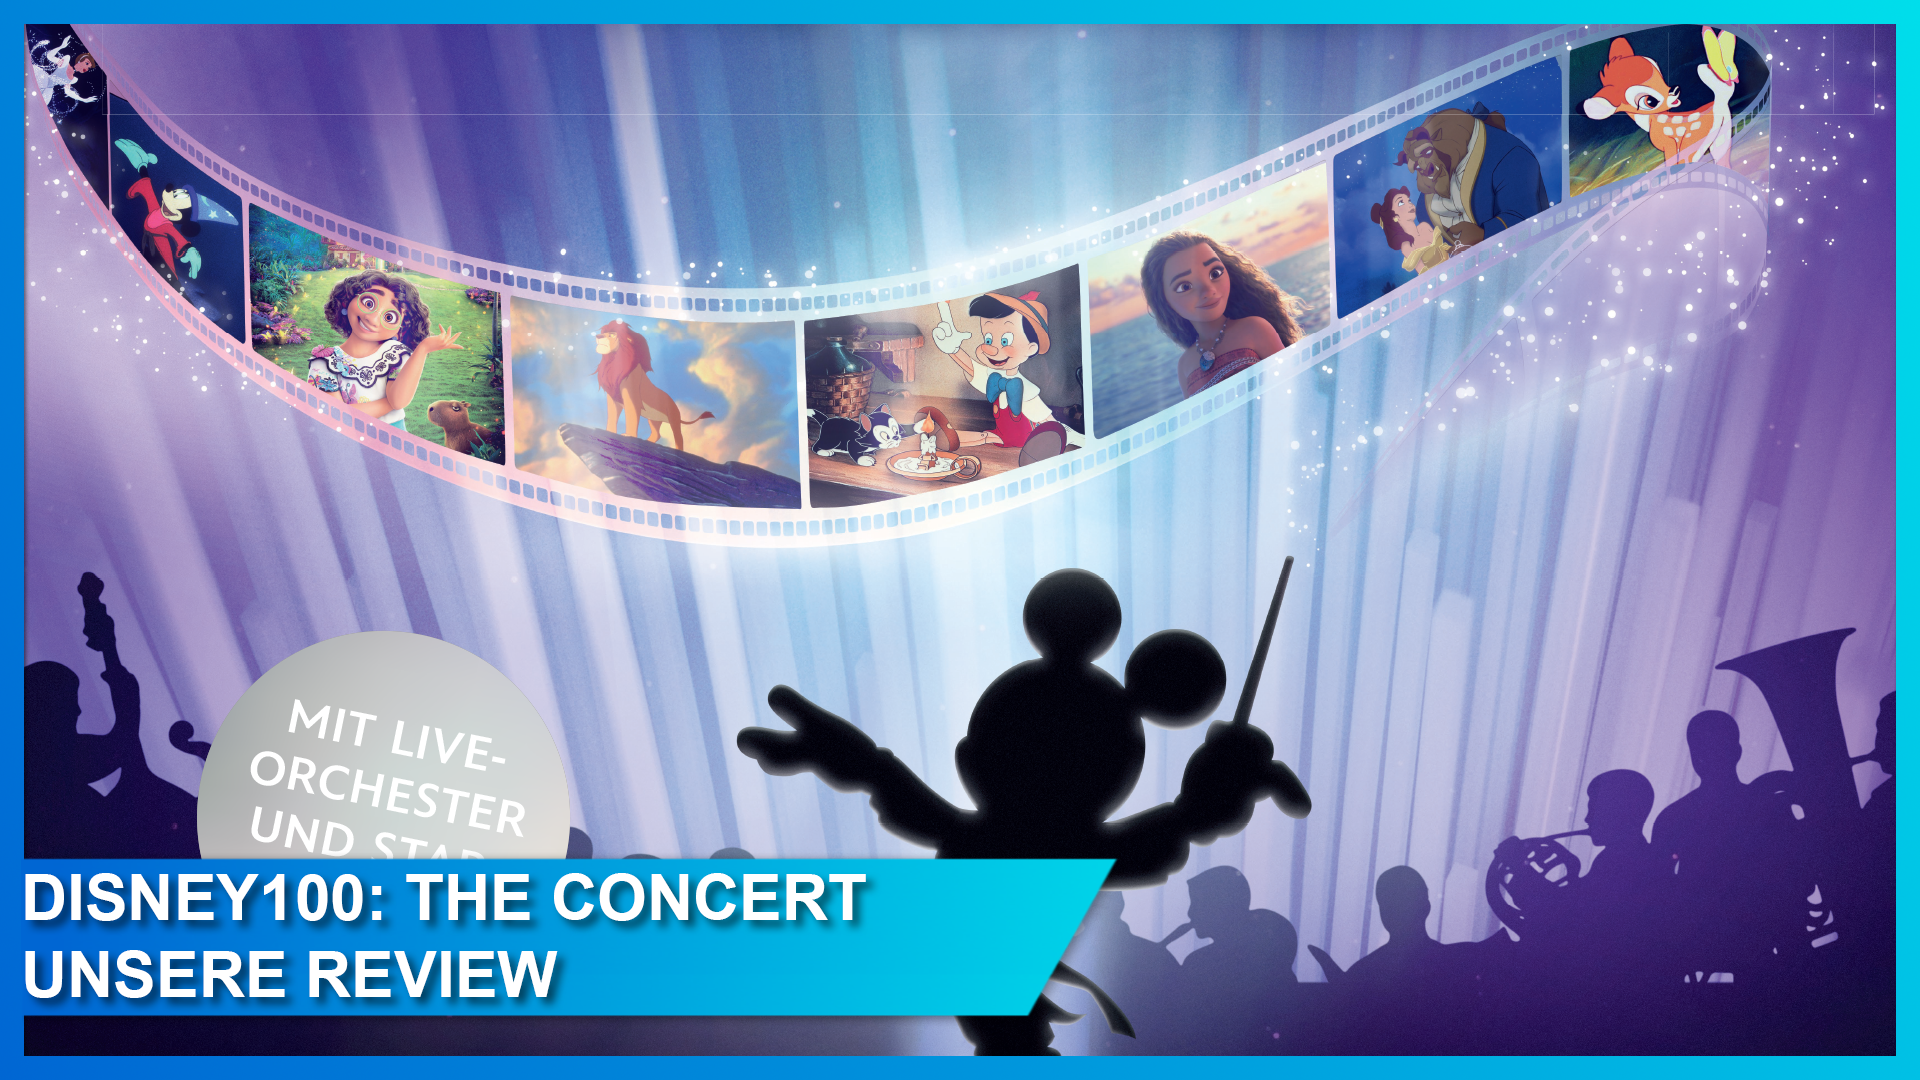 Disney100 - The Concert: Unsere Review